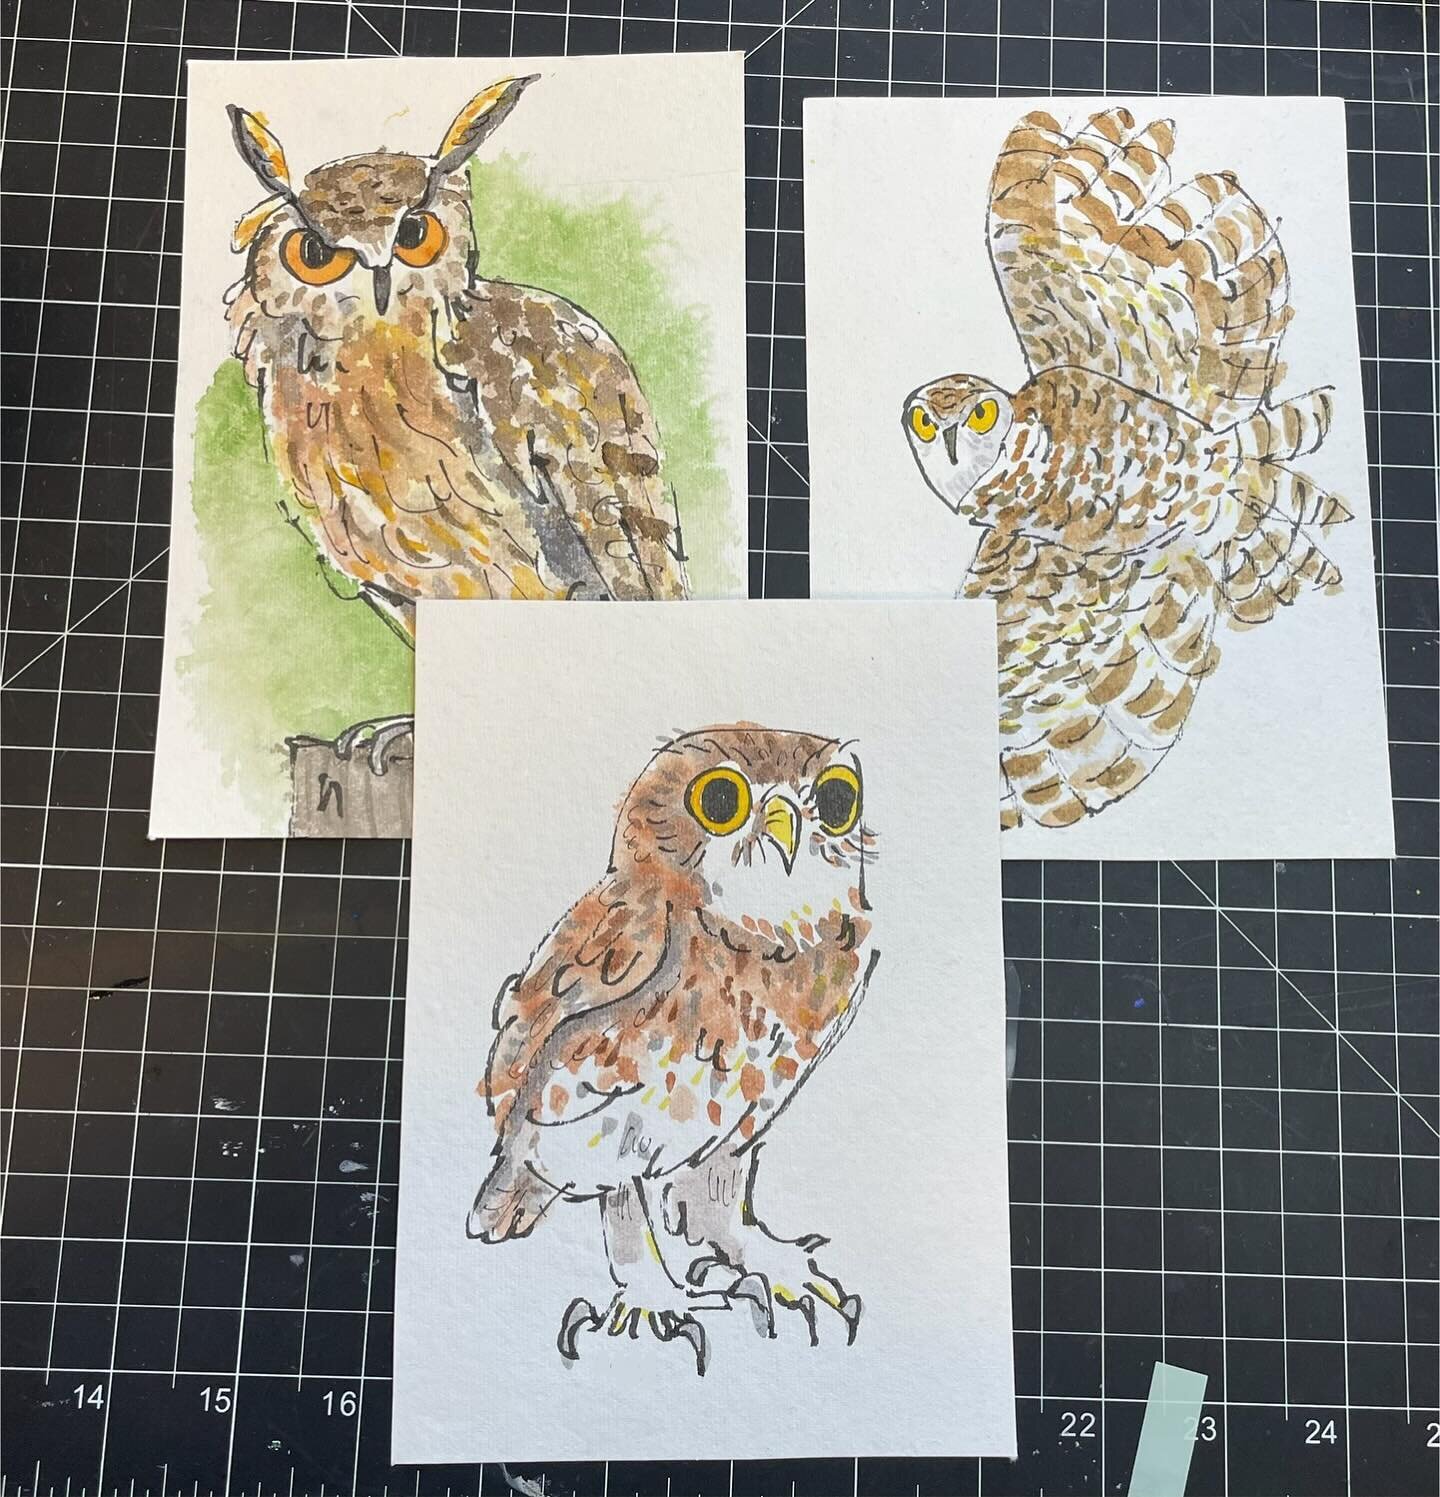 Just some angry owls and one who maybe looks confused and maybe not 100% like an owl even though it was supposed to be. Owls are cool but hard to draw.